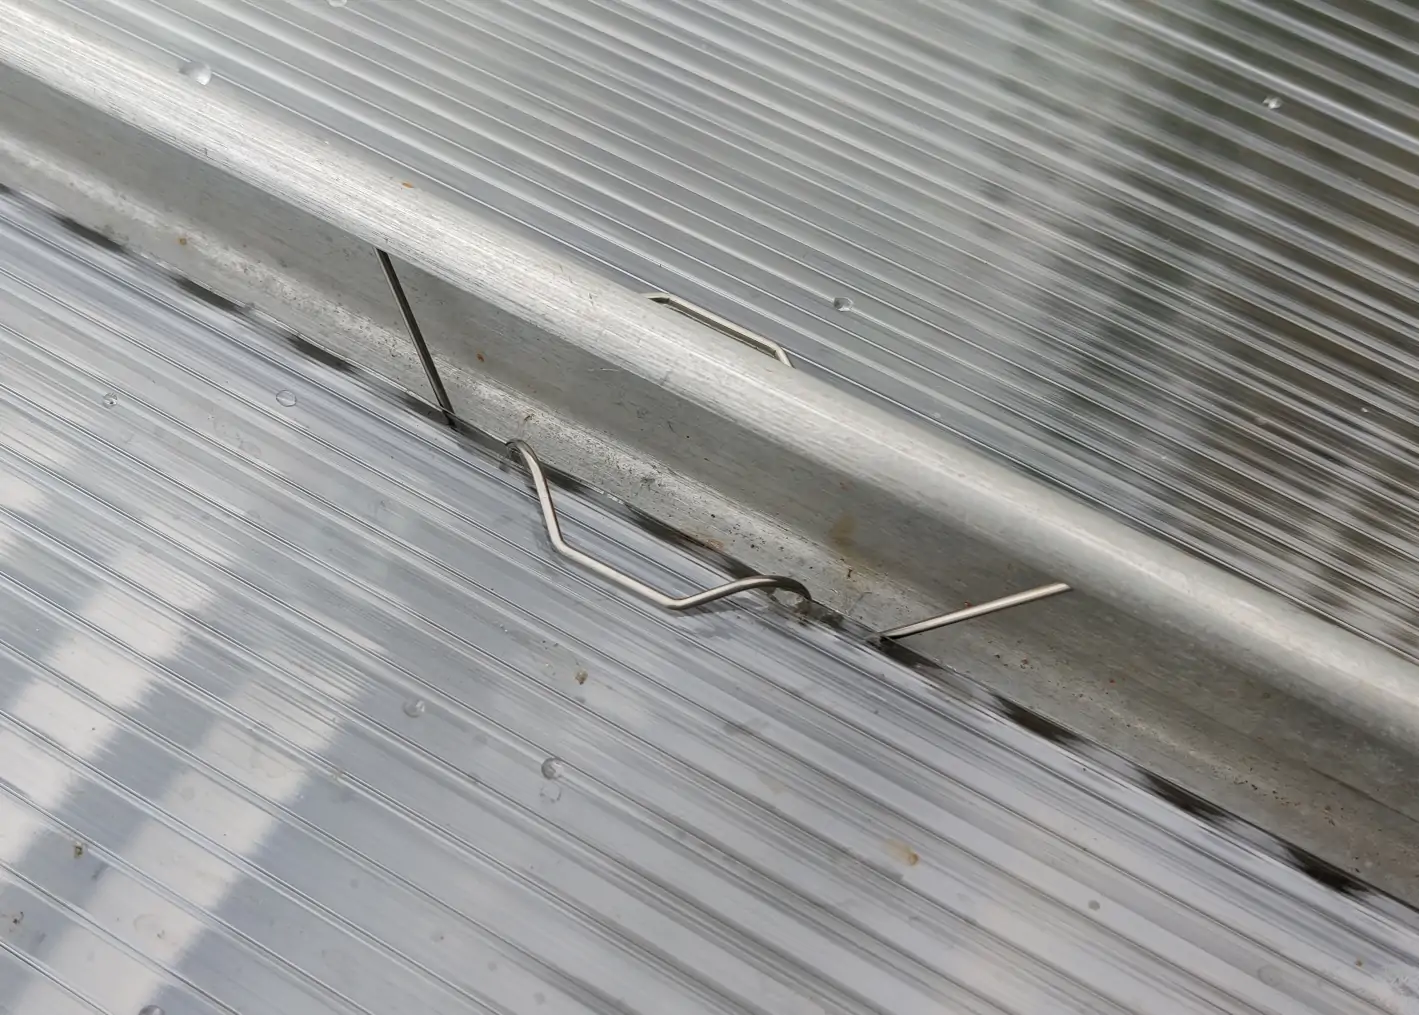 Greenhouse standard wire w-clip, a shaped metal wire pushing down on a plastic pane